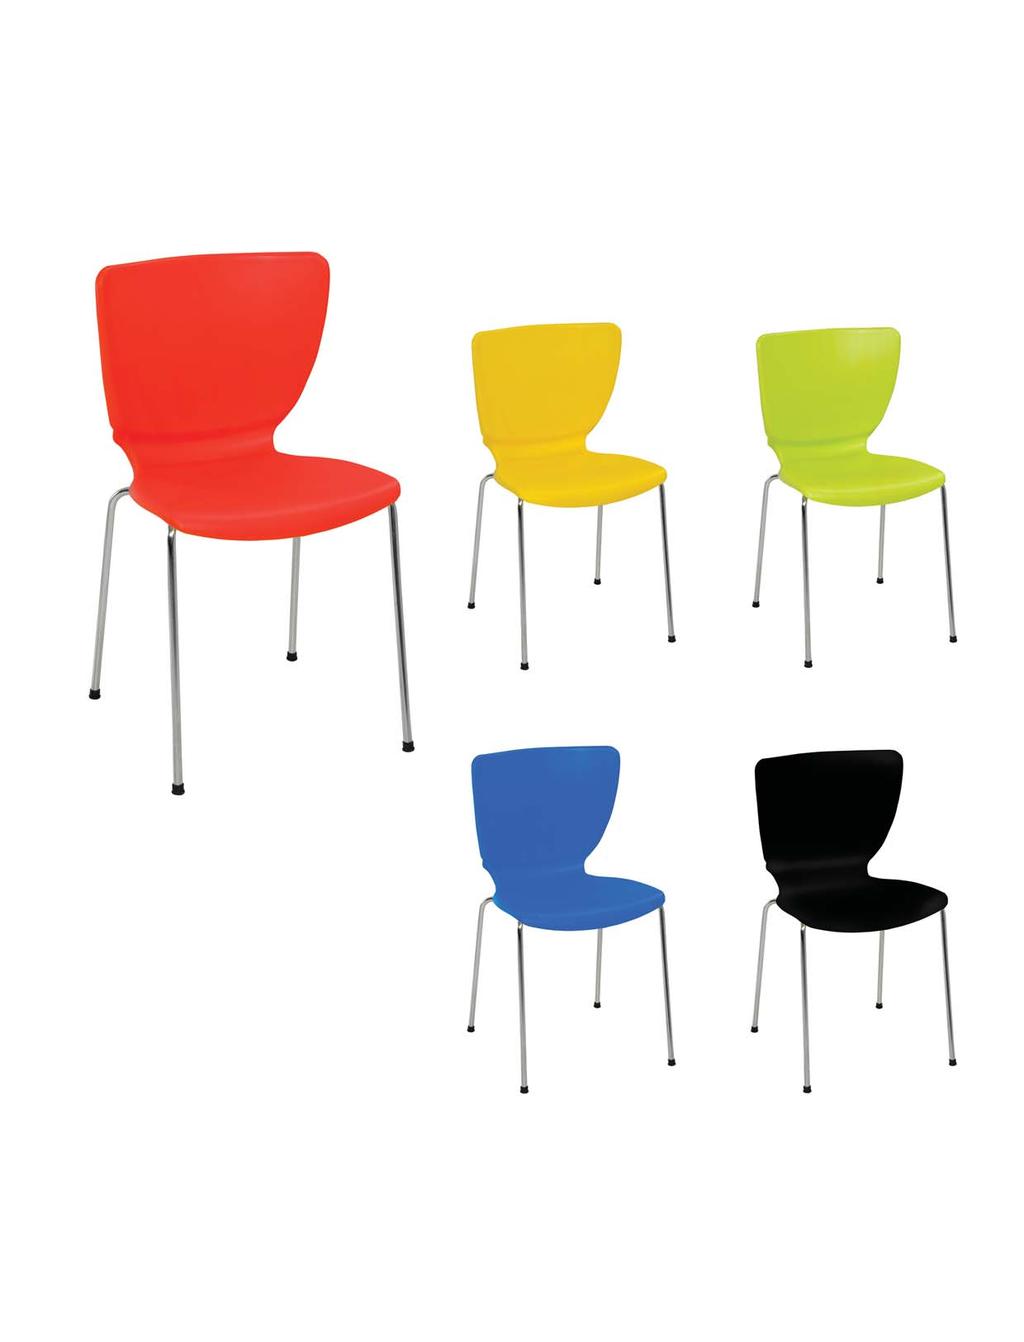 SIENA YELLOW FLUORESCENT GREEN RED BLUE BLACK SIENA is a stackable chair with seat moulded in tough virgin polymers and legs of stainless steel.